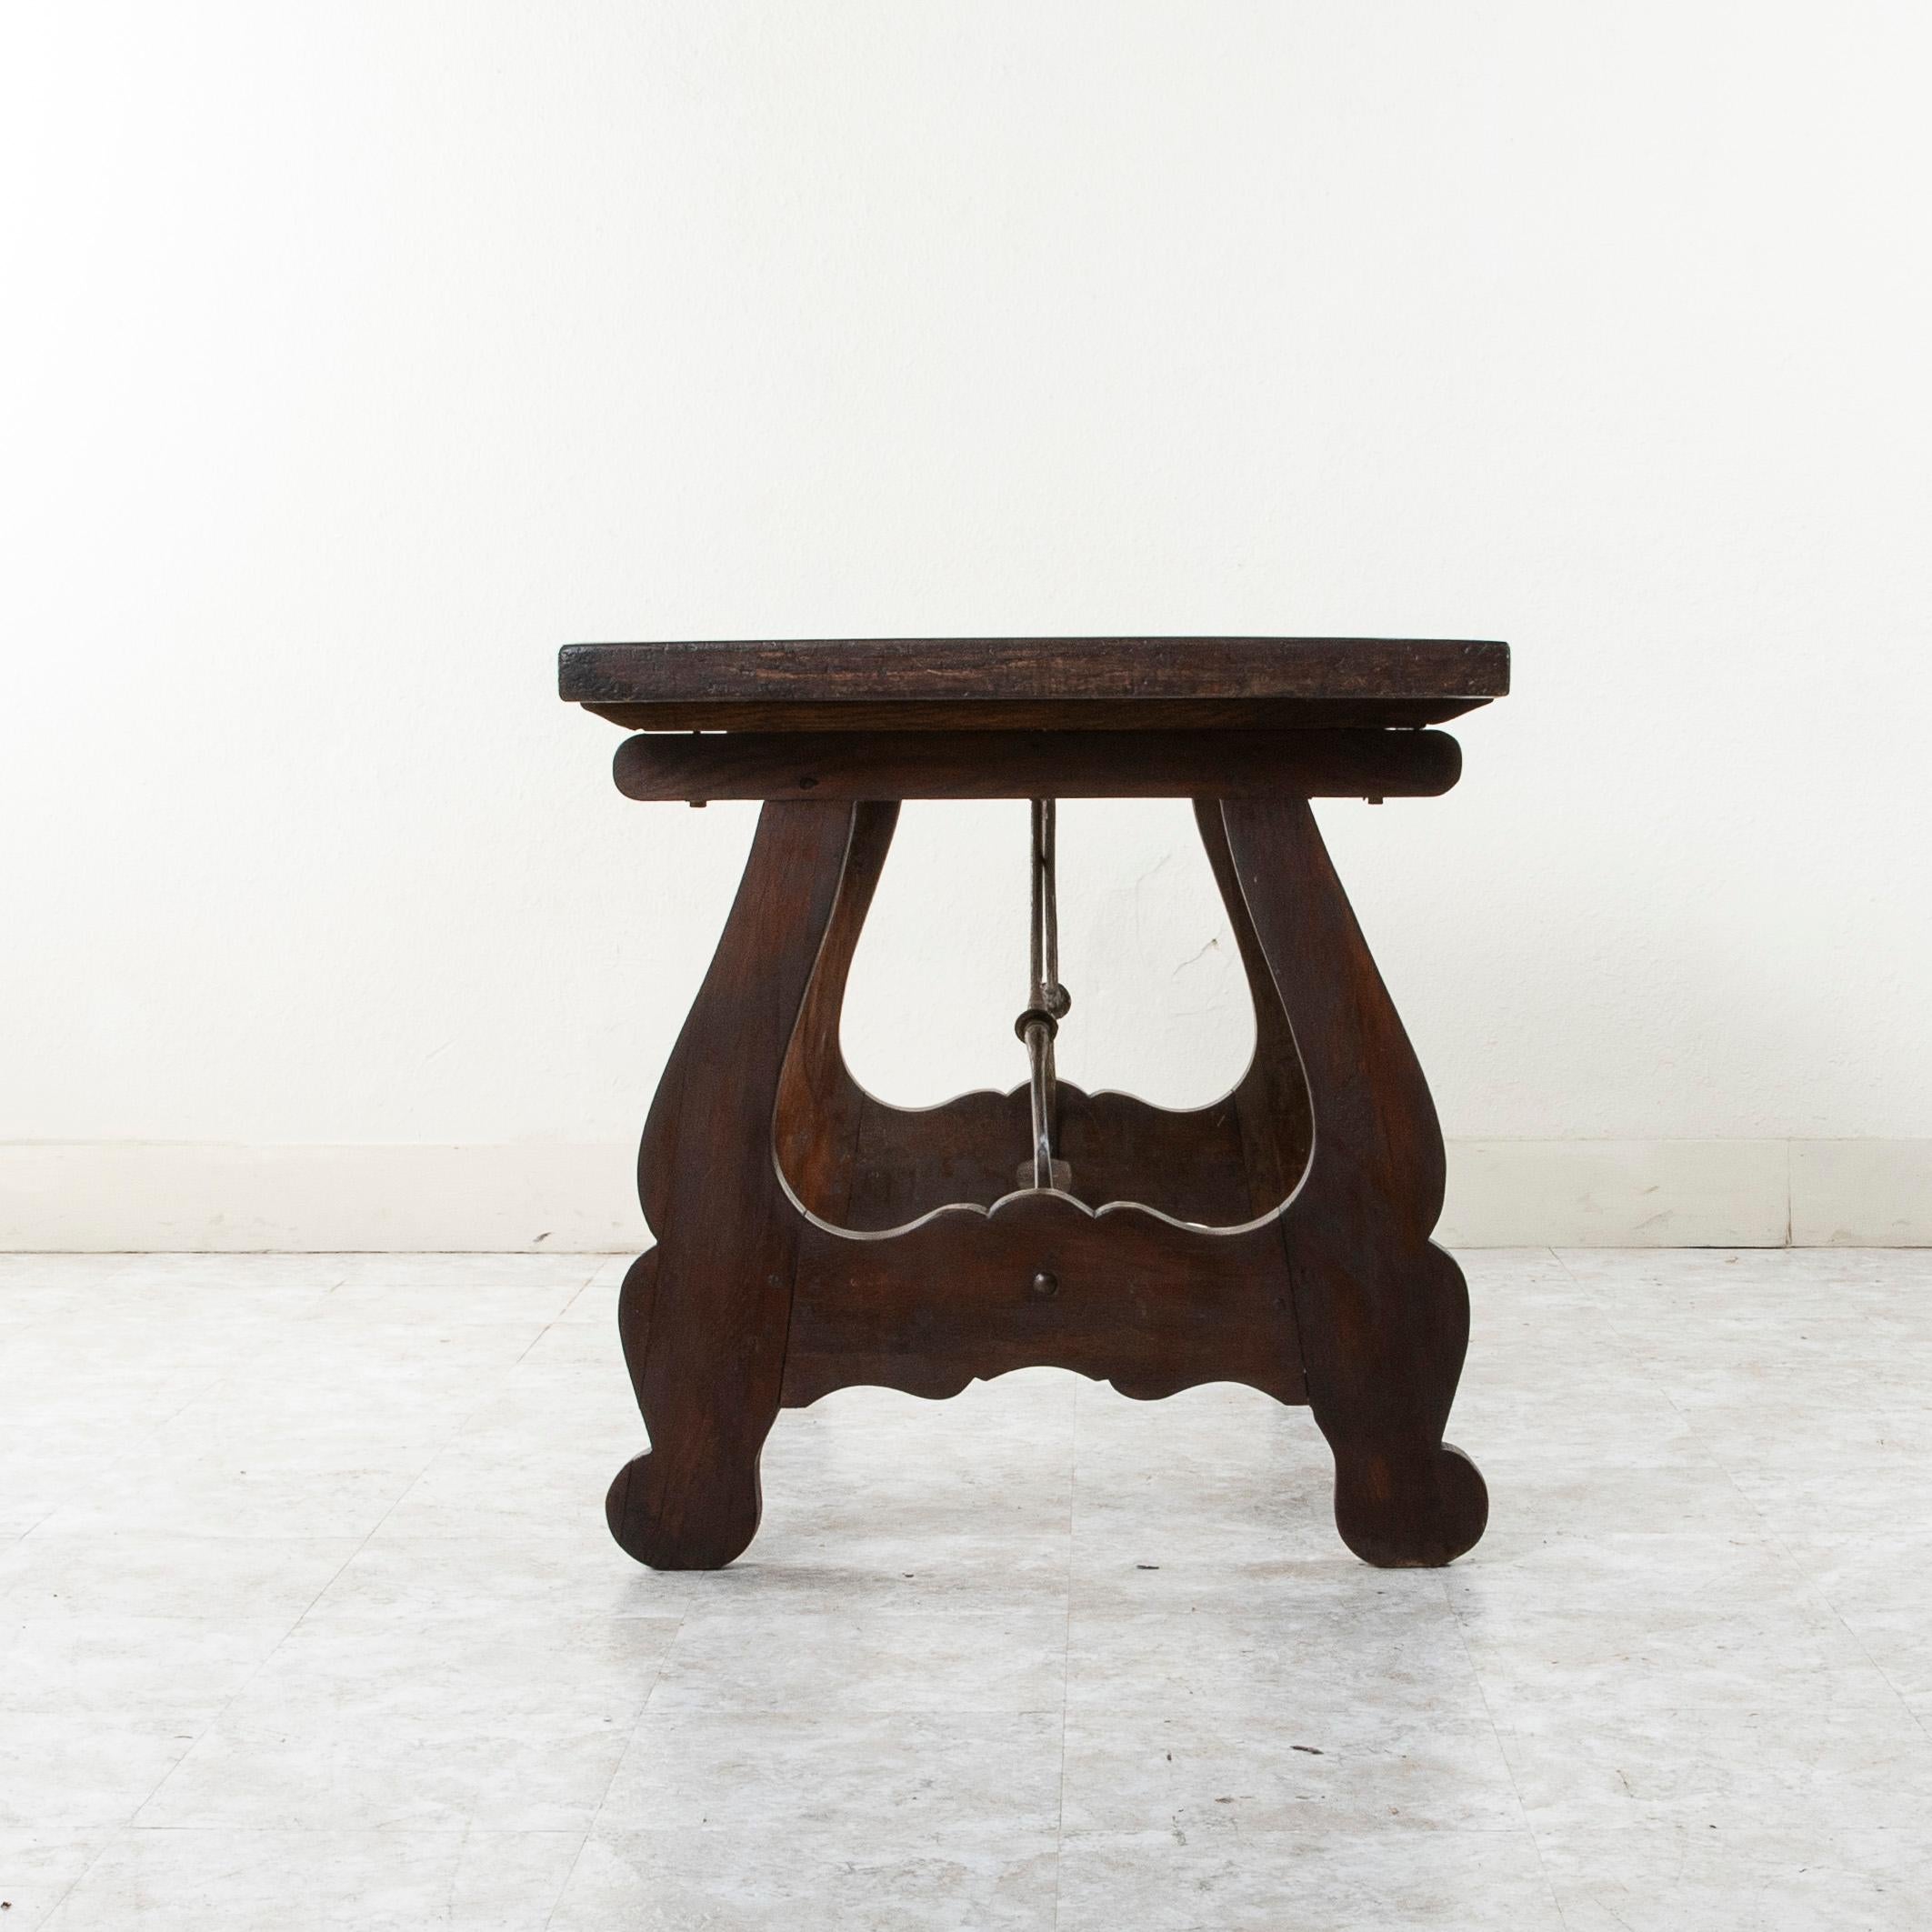 19th Century Spanish Renaissance Style Walnut Writing Table with Iron Stretcher For Sale 1